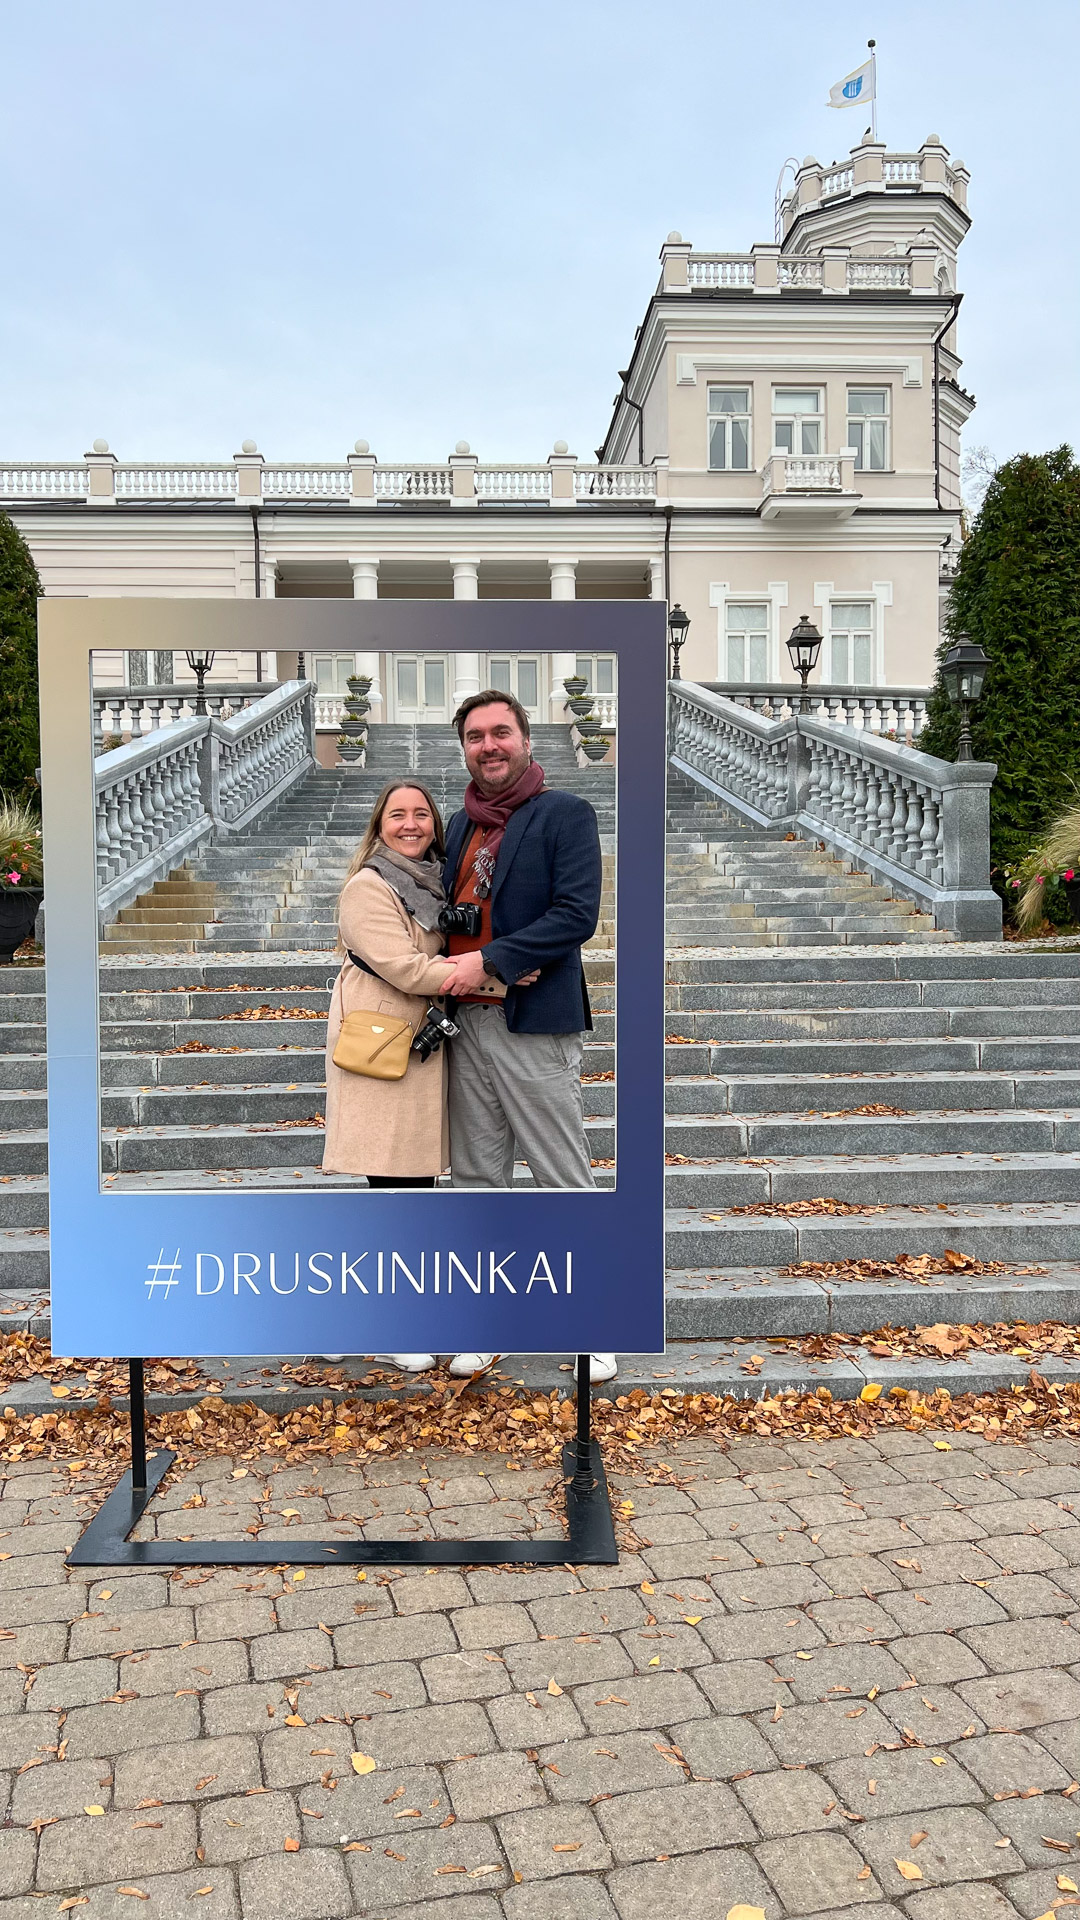 man and woman standing inside a frame with #druskininkai written on it in front of famous house